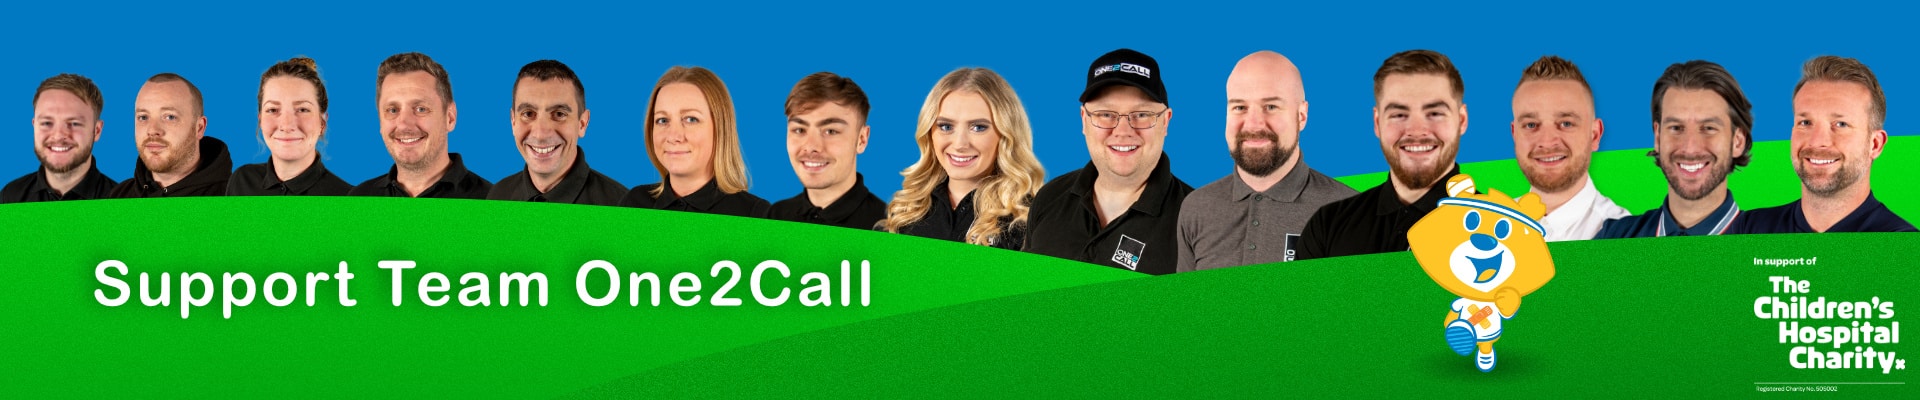 One2Call, In Support of The Children's Hospital Charity